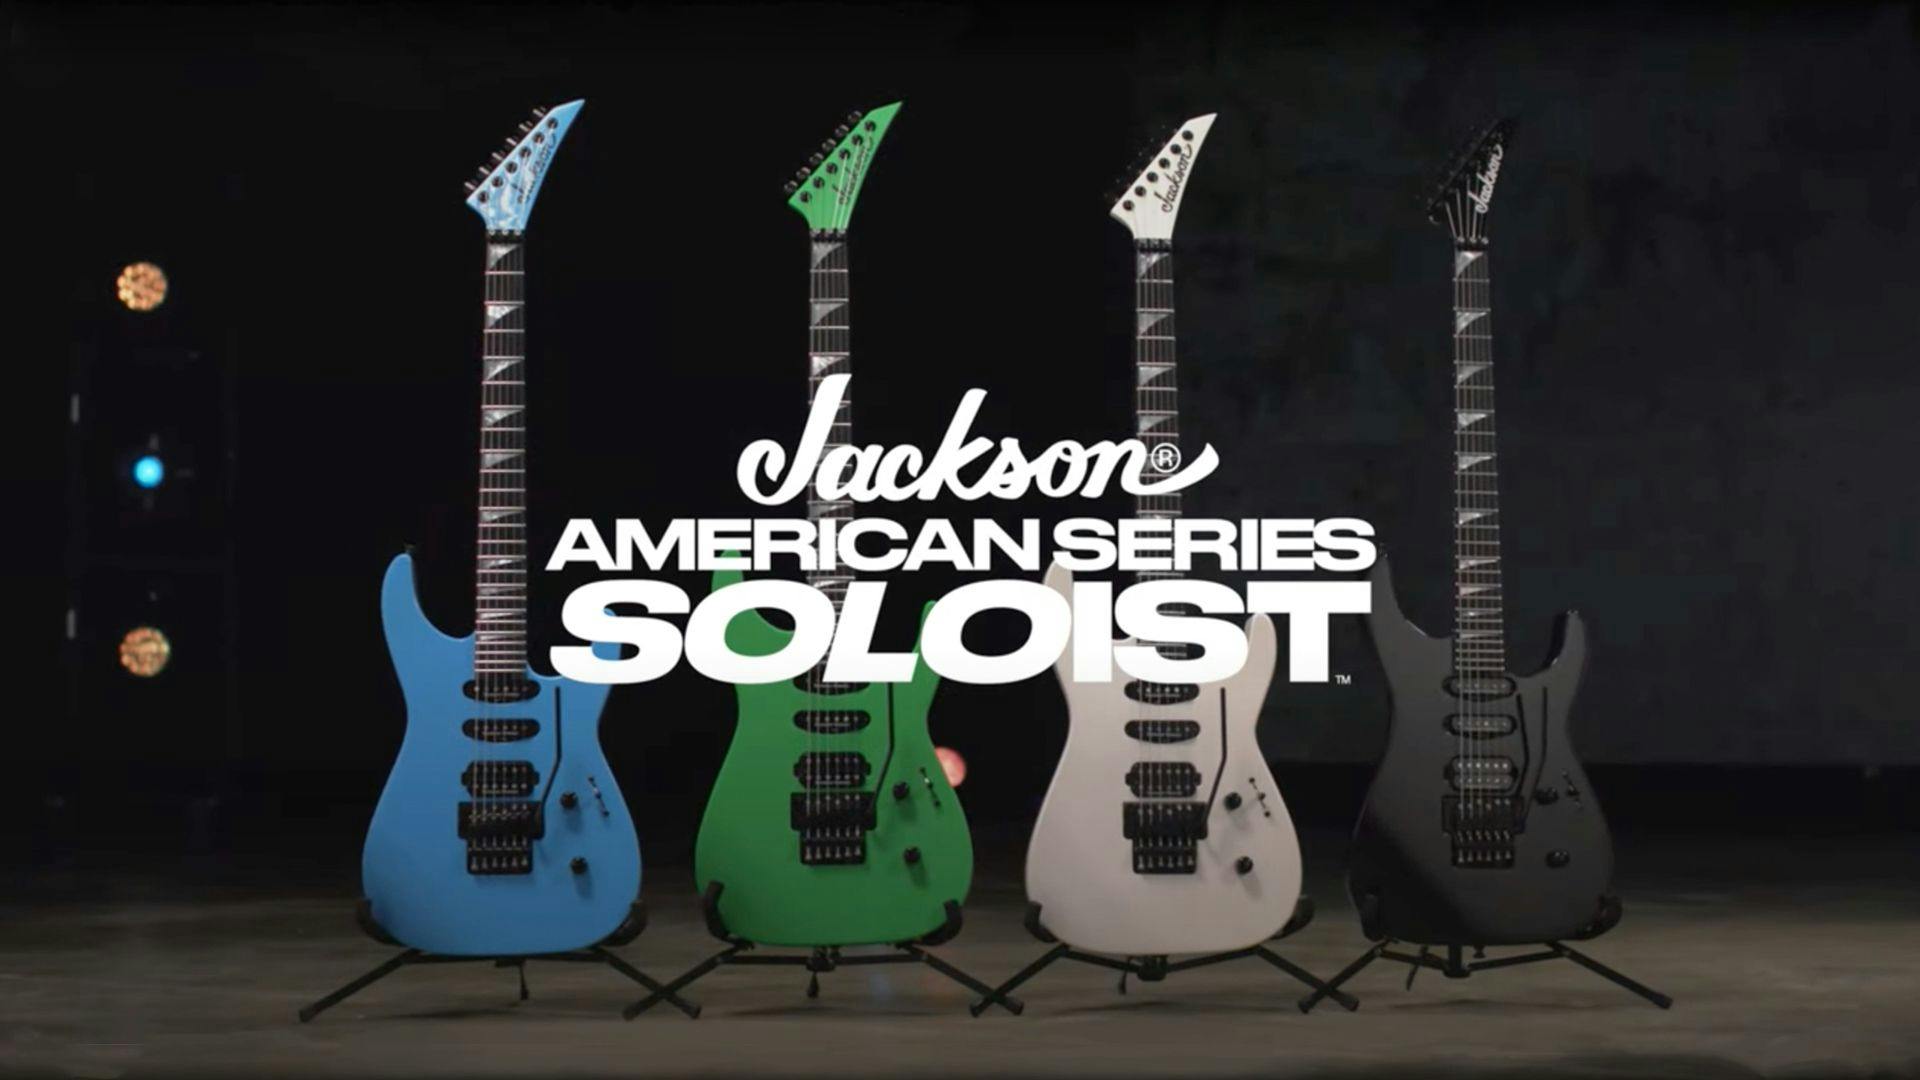 Jackson American Series Soloist campaign title card featuring the blue, green, white, and black guitar